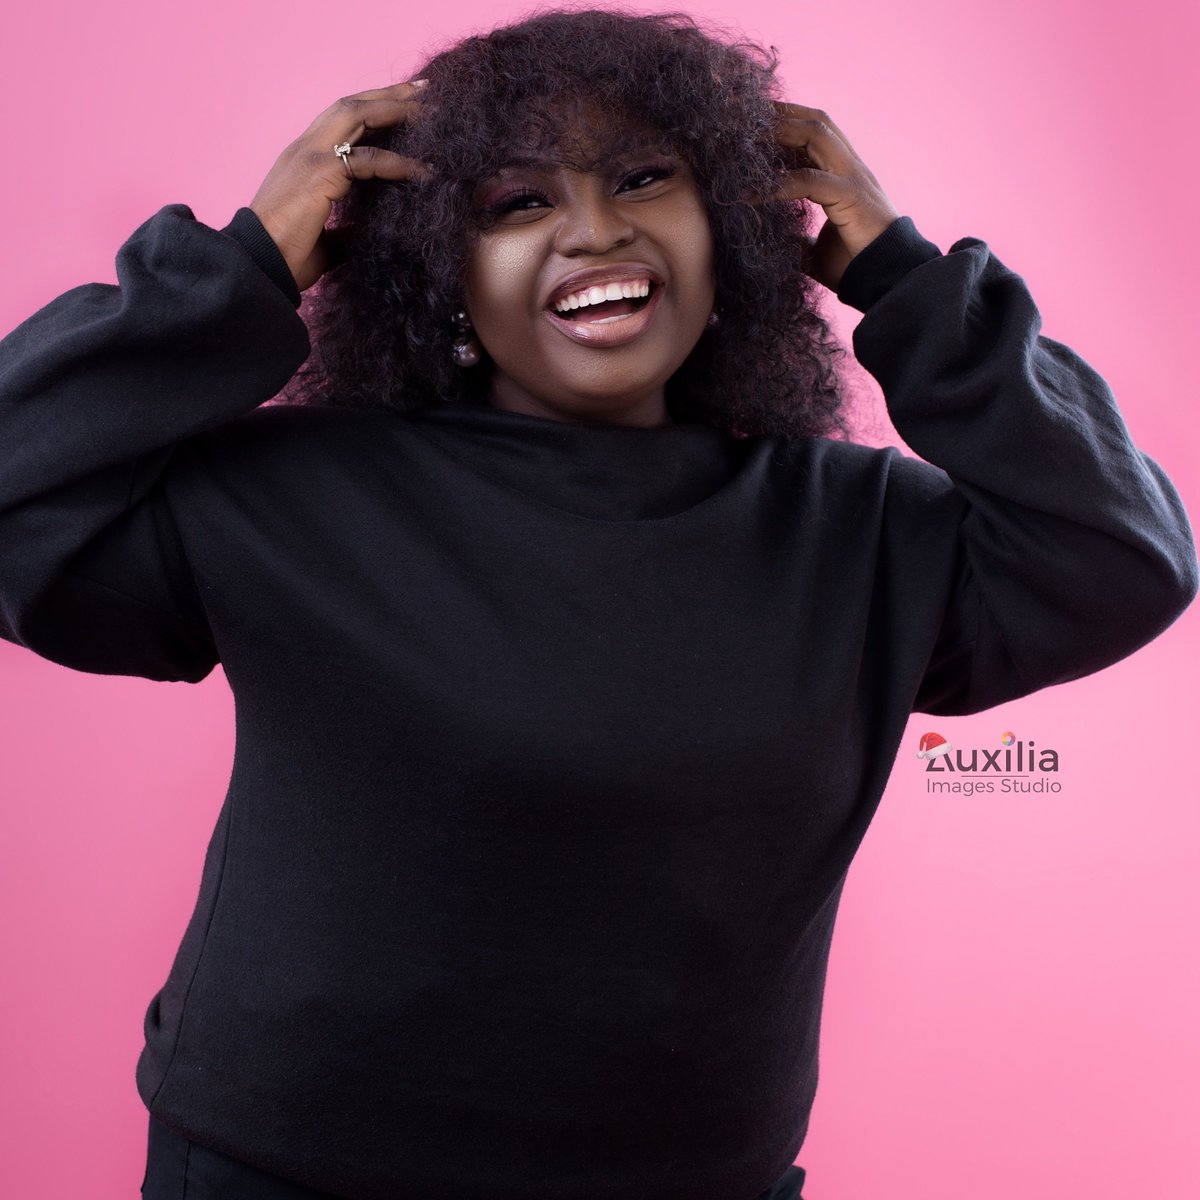 Be The Reason Someone Smiles Today!!
Her Smile is Indeed Contagious😃😃
•
Our Model Shoot💕💙
•
📸 @auxiliaimagesstudio 
Model: @Kanyinsola_omoj
Makeup By: @sesanified_ 

#happymodel #models #brandphotography #productsshoot #photooftheday #instagram #instagood